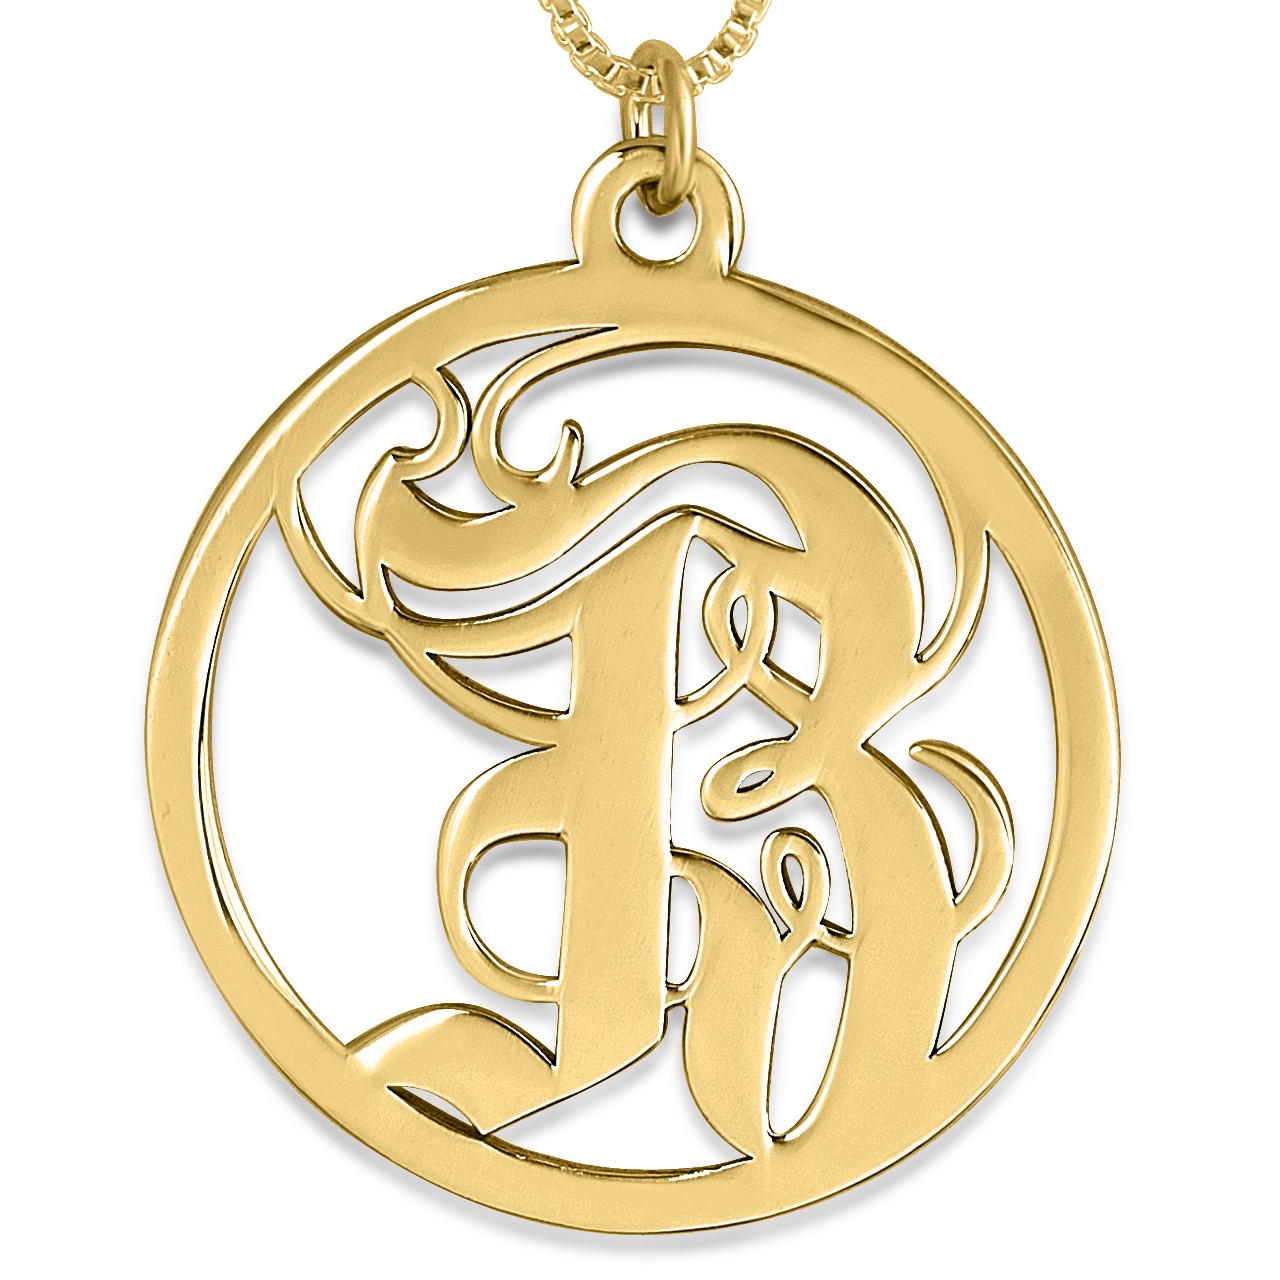 Old English Initial Pendant, 24k Gold Plated - 1